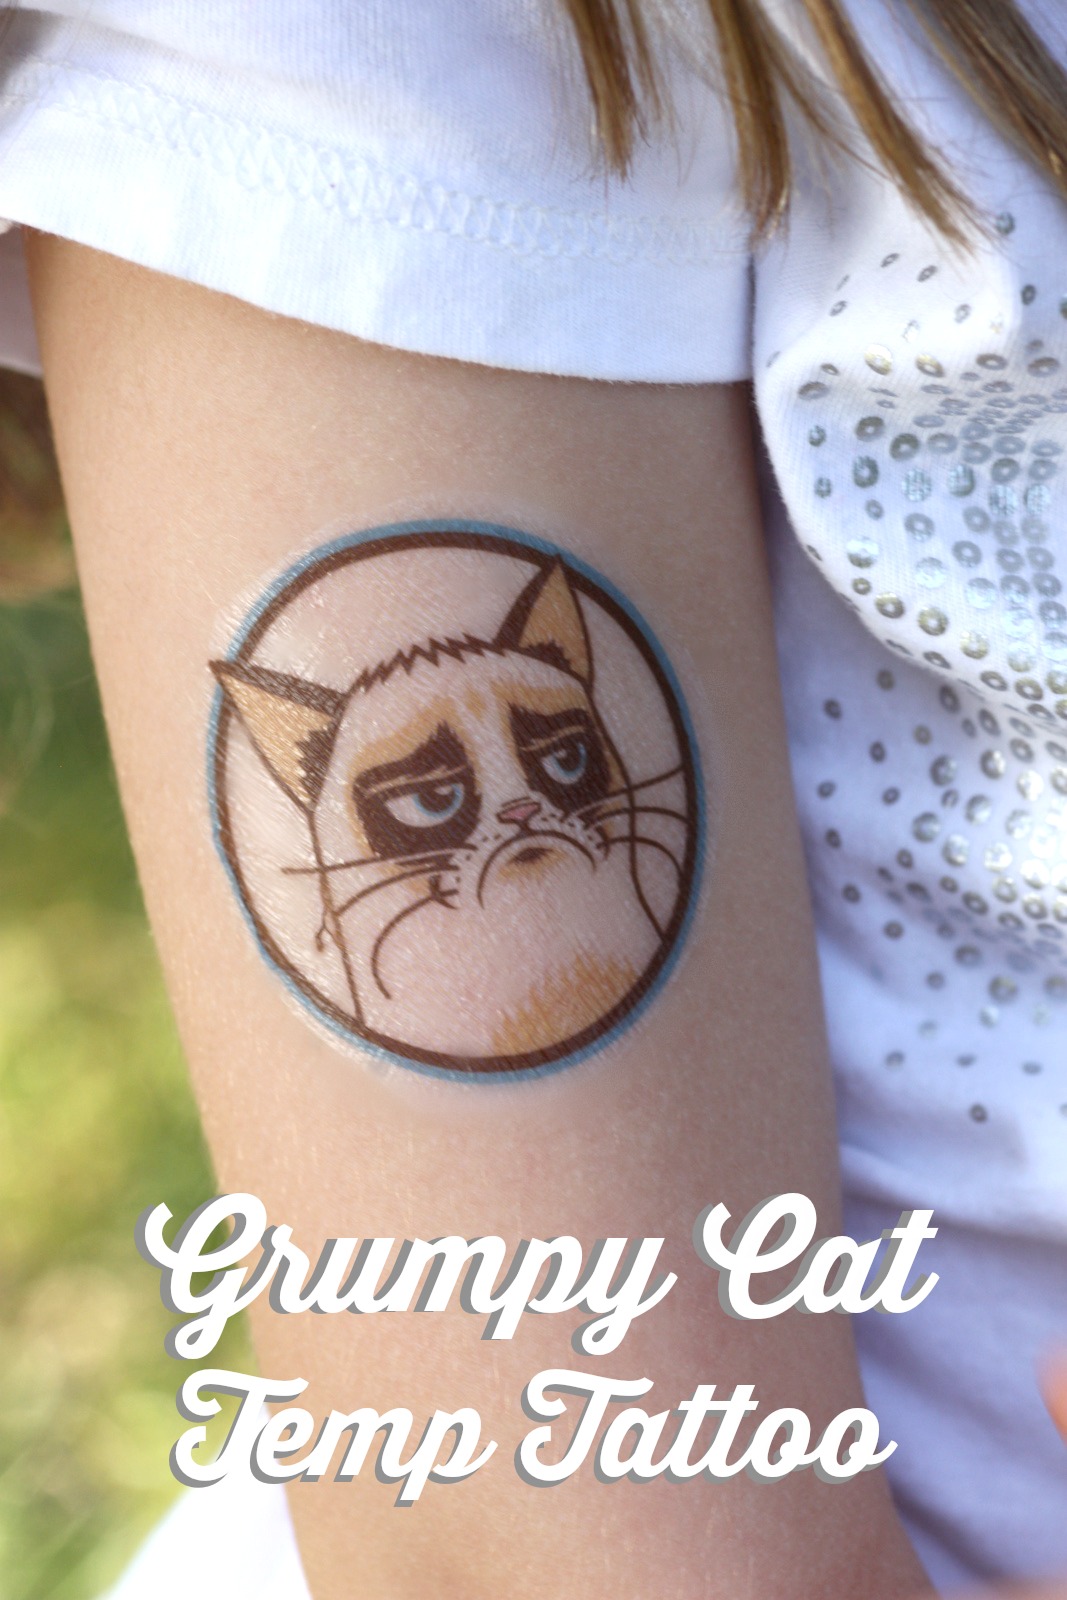 grumpy-cat-printable-tattoo-14.jpg - The Catch My Party Blog The Catch